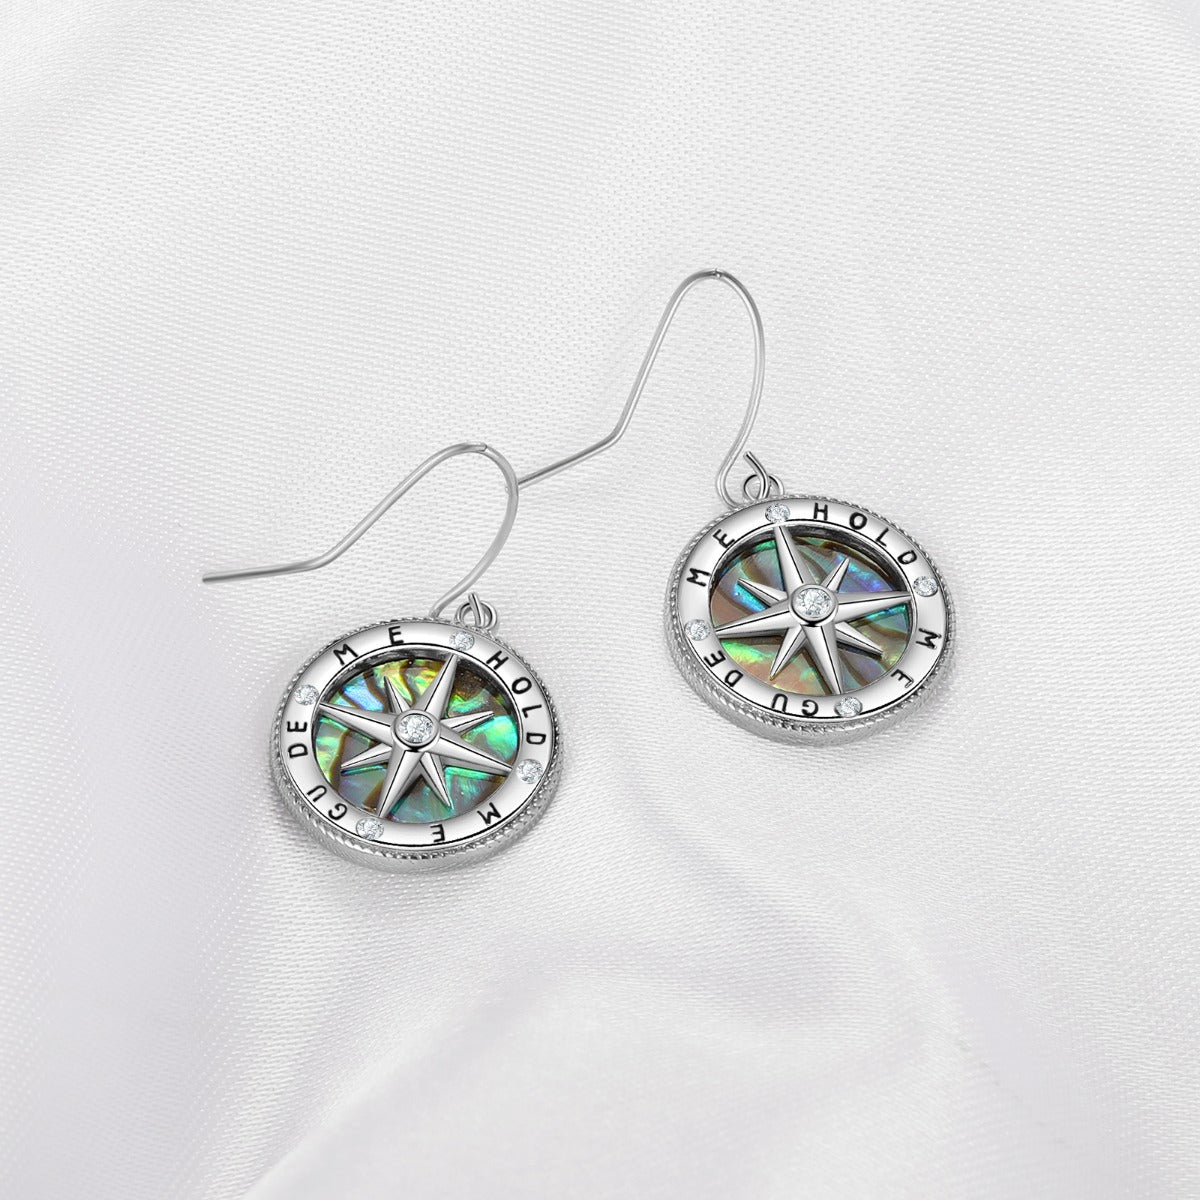 Rhodium Plated Compass Earrings